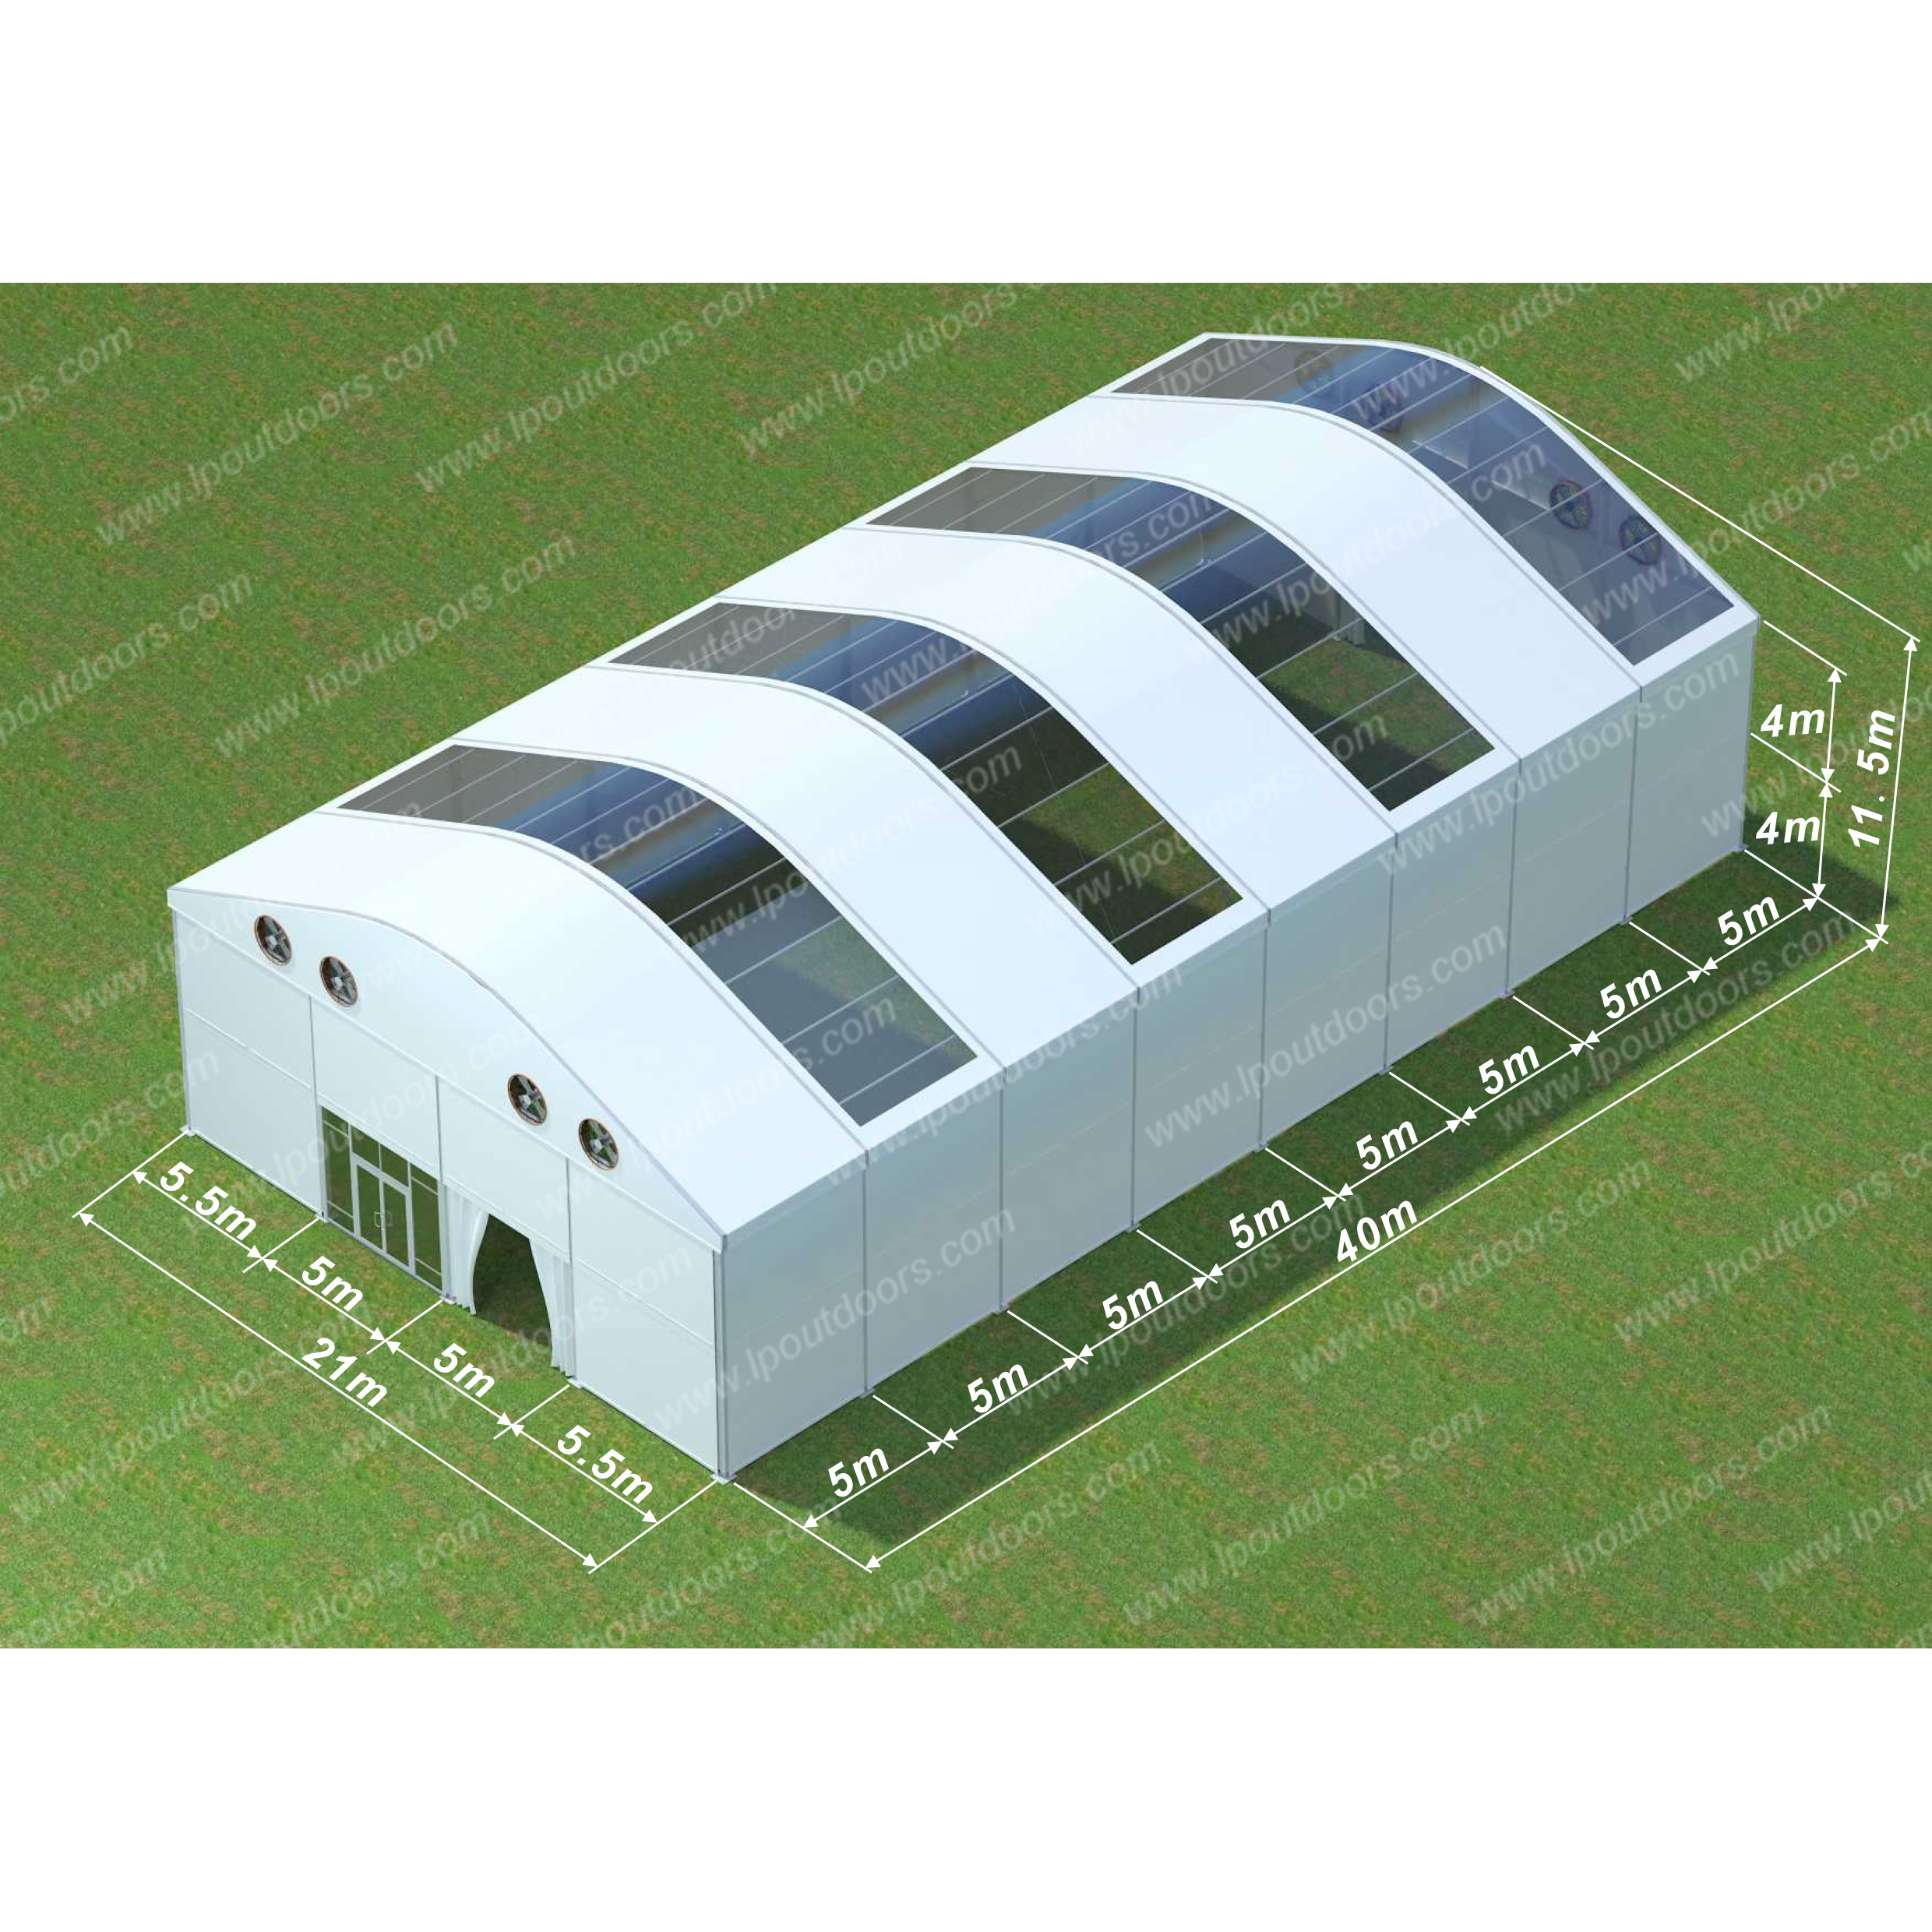 21m big high tent with 8m side height